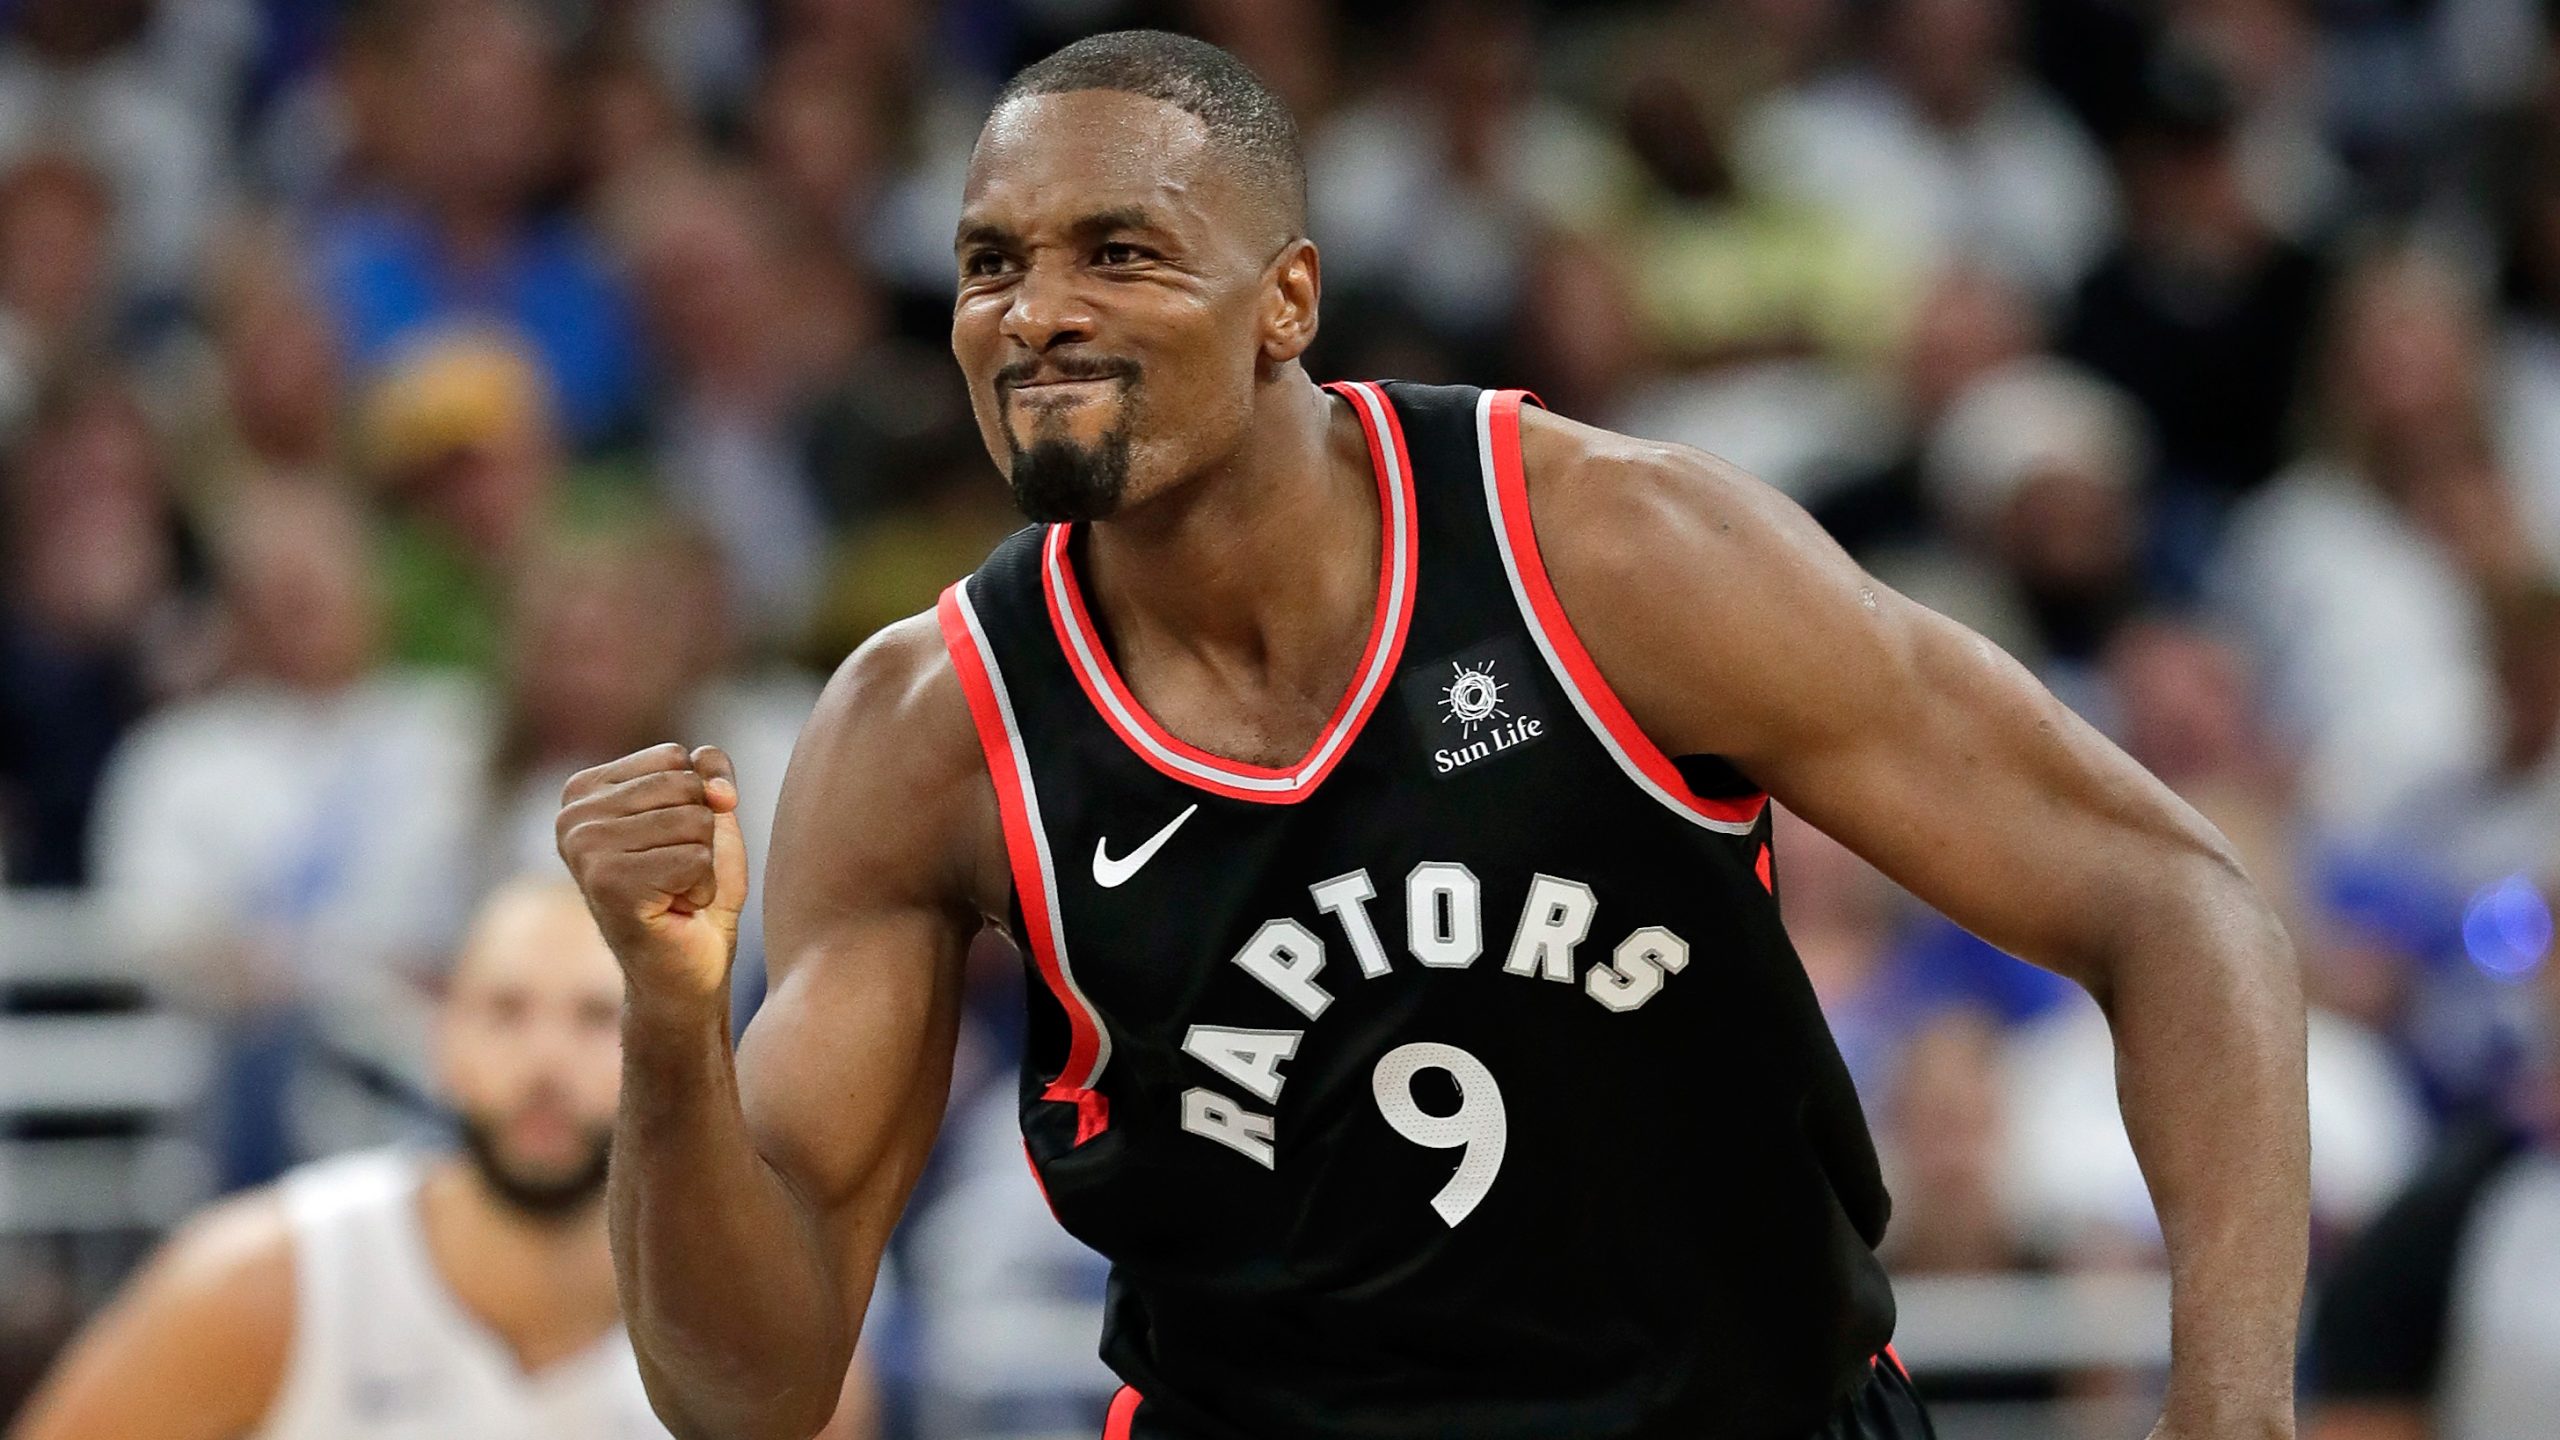 Serge Ibaka, NBA News: Why is Serge Ibaka not playing? What teams would benefit with the former NBA champ?